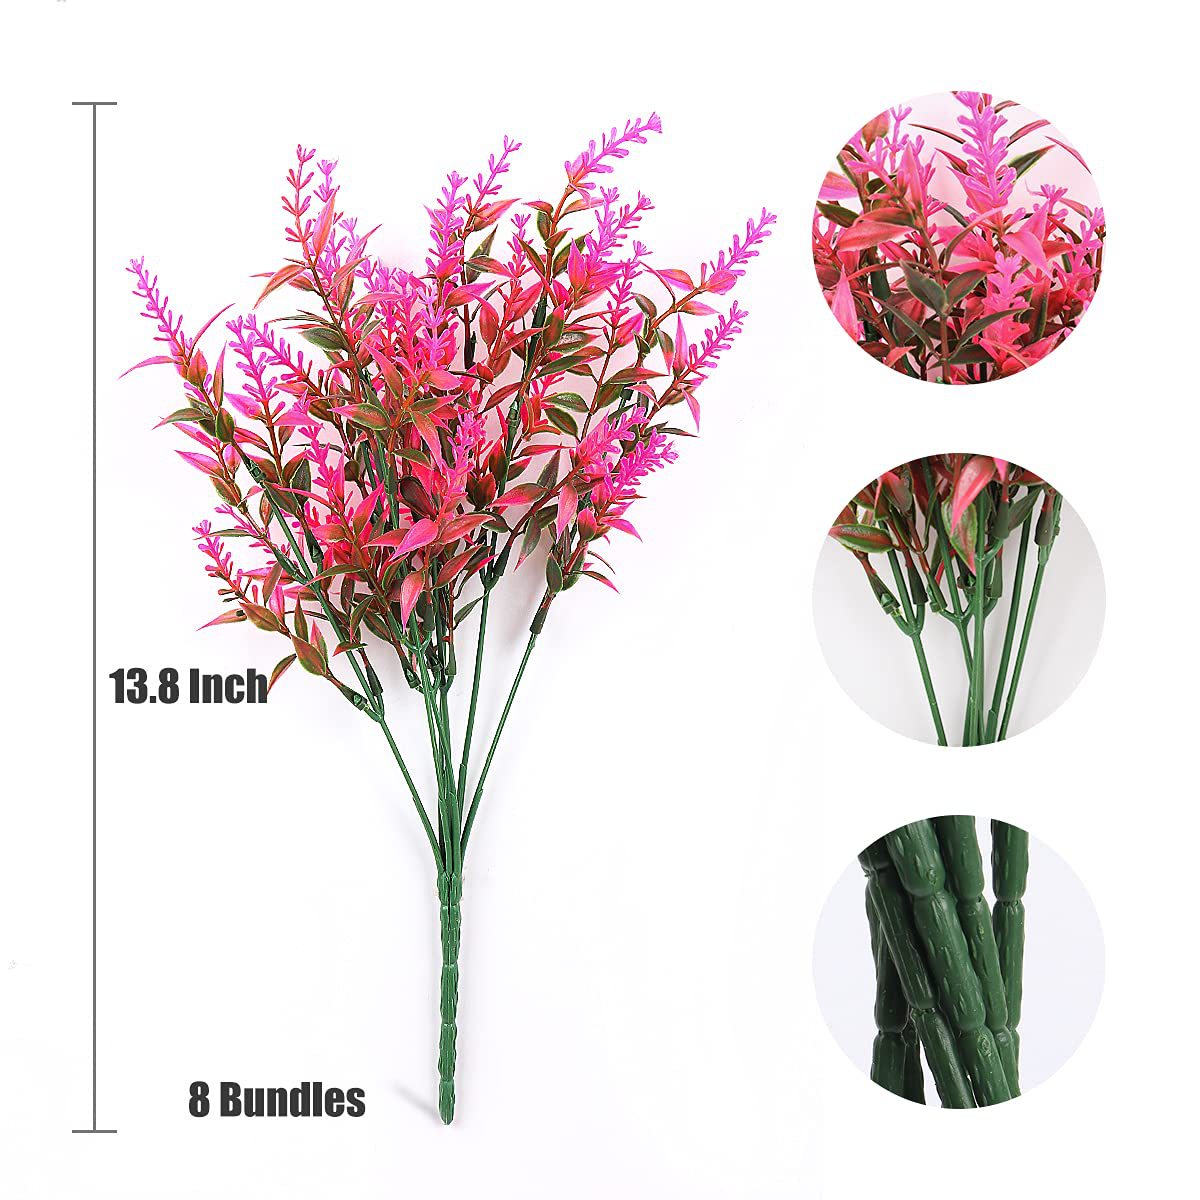 Amazon 8 Bunches of Artificial Lavender Flowers for Outdoor Decoration, UV Protection Bush House Office